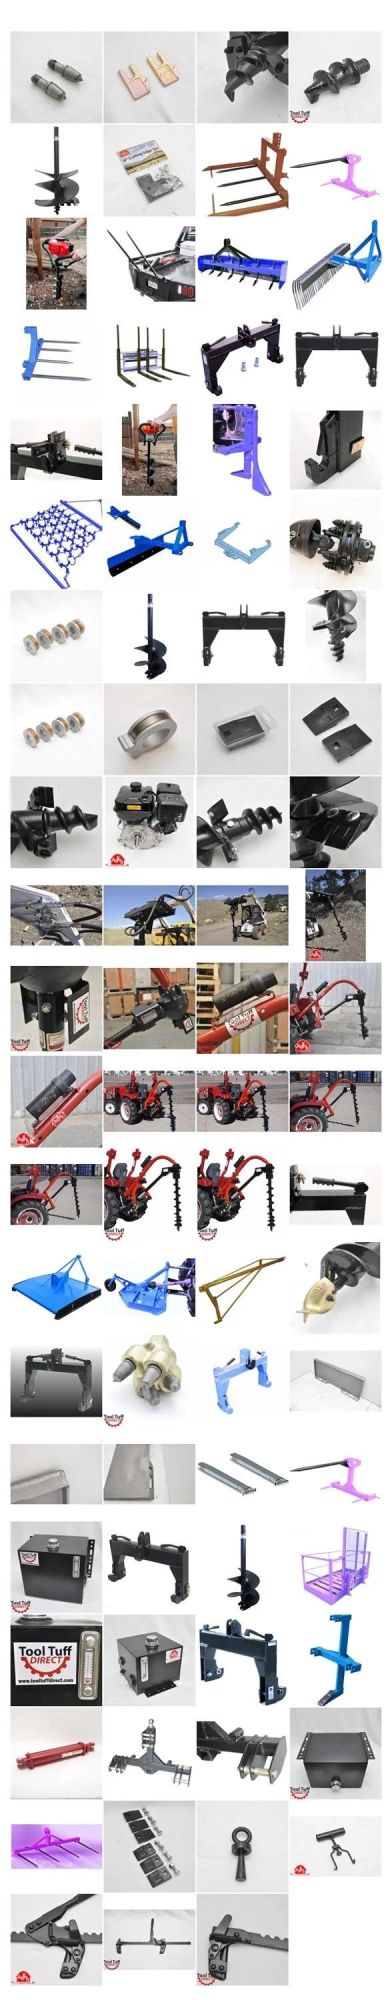 High Precious Quality for 3 Point Disc Ridger Plough China Manufacturer Factory